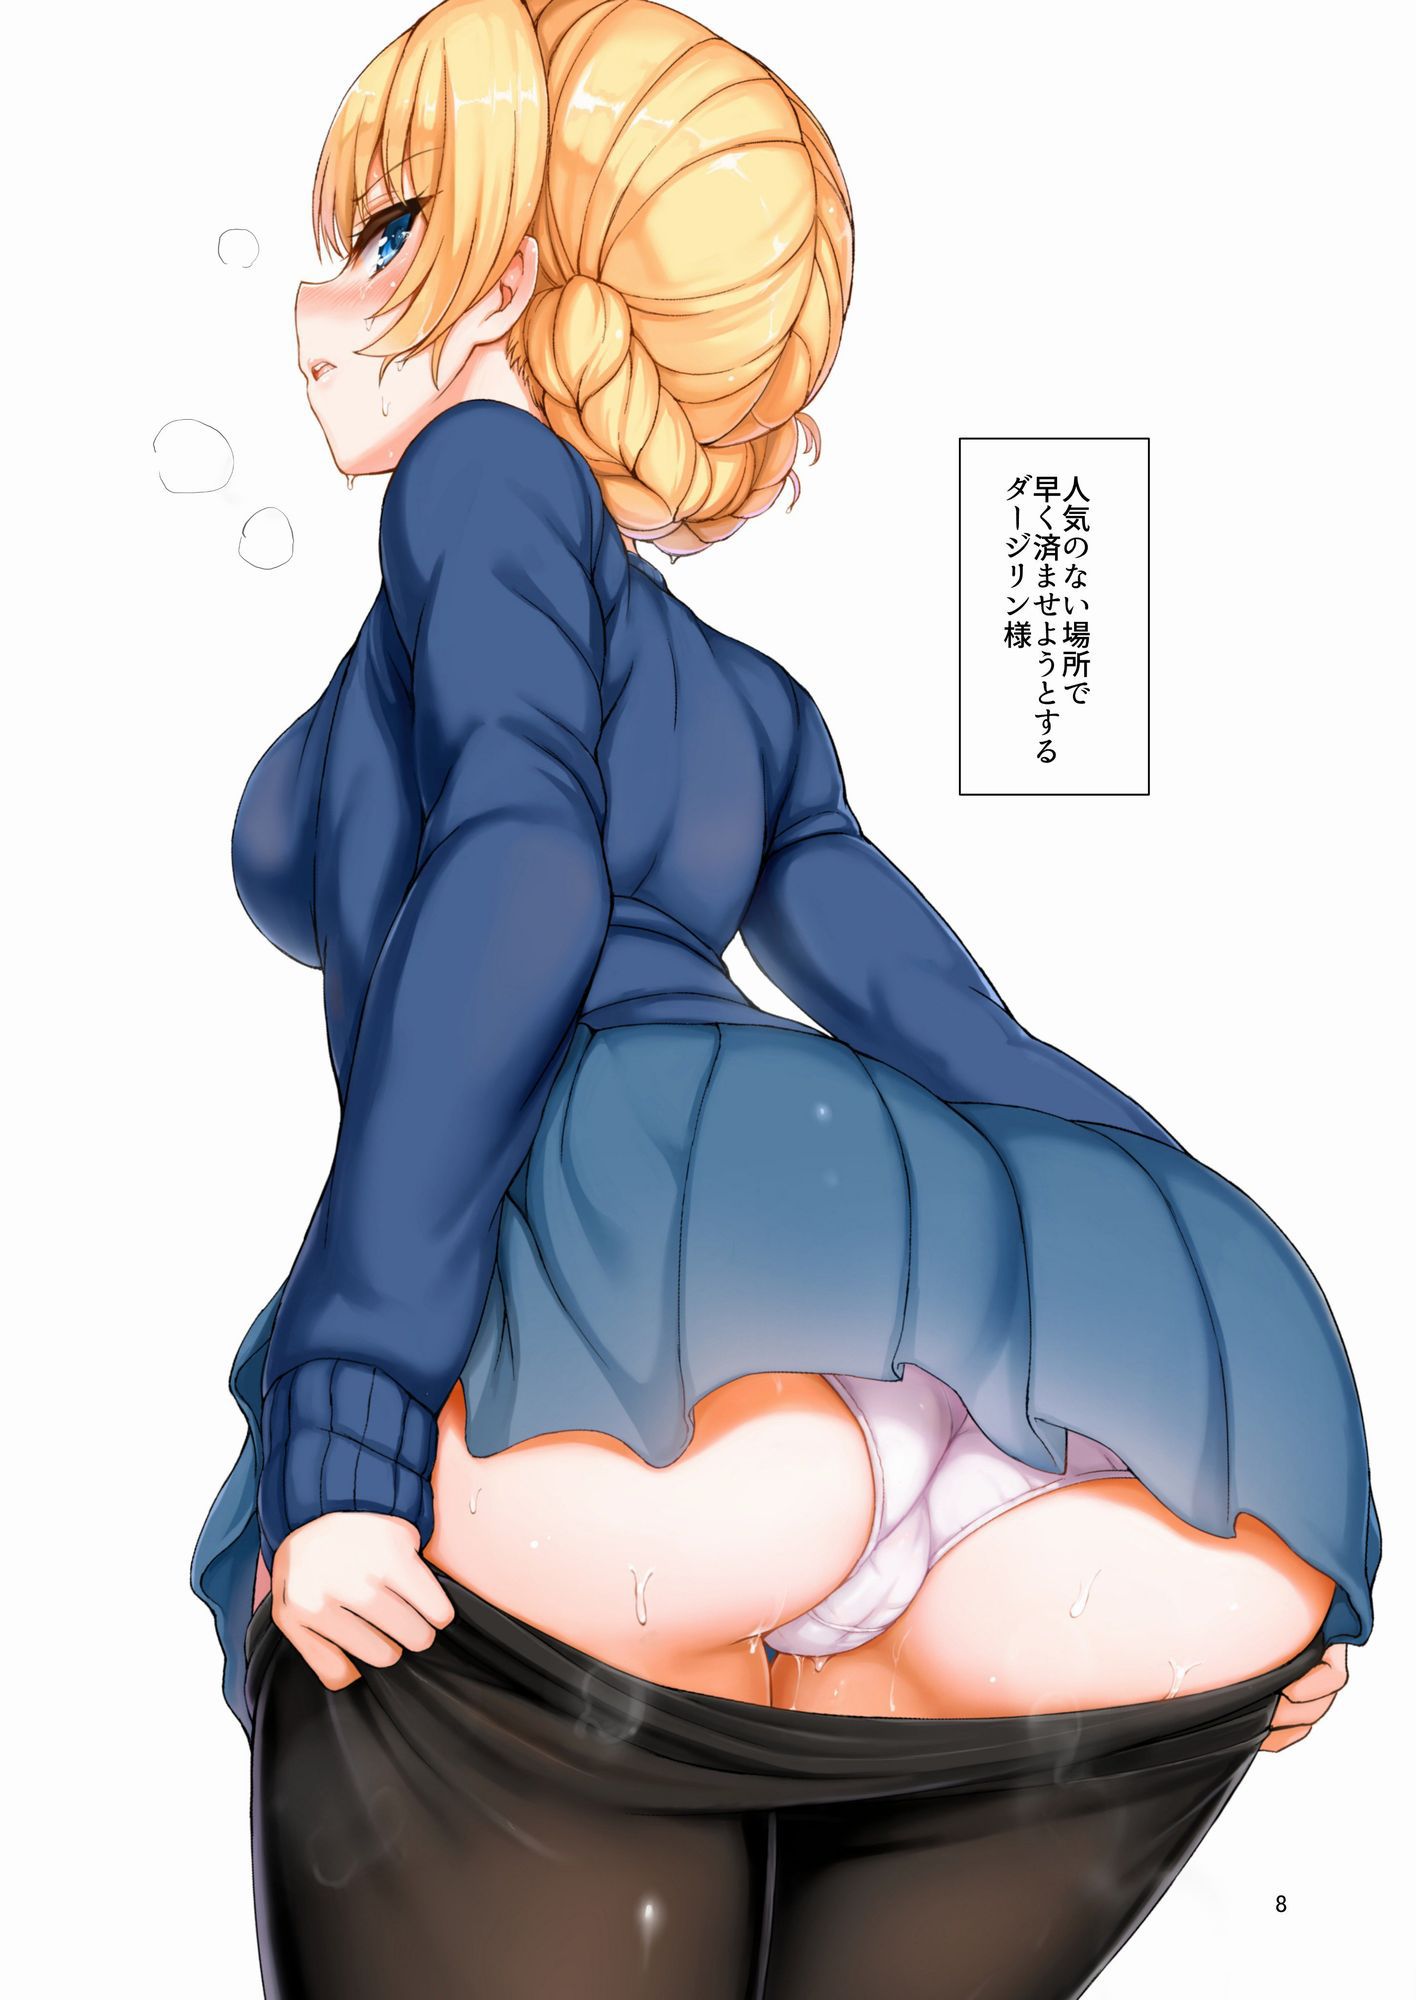 [2D] secondary image of an erotic child who is panchira from behind 6